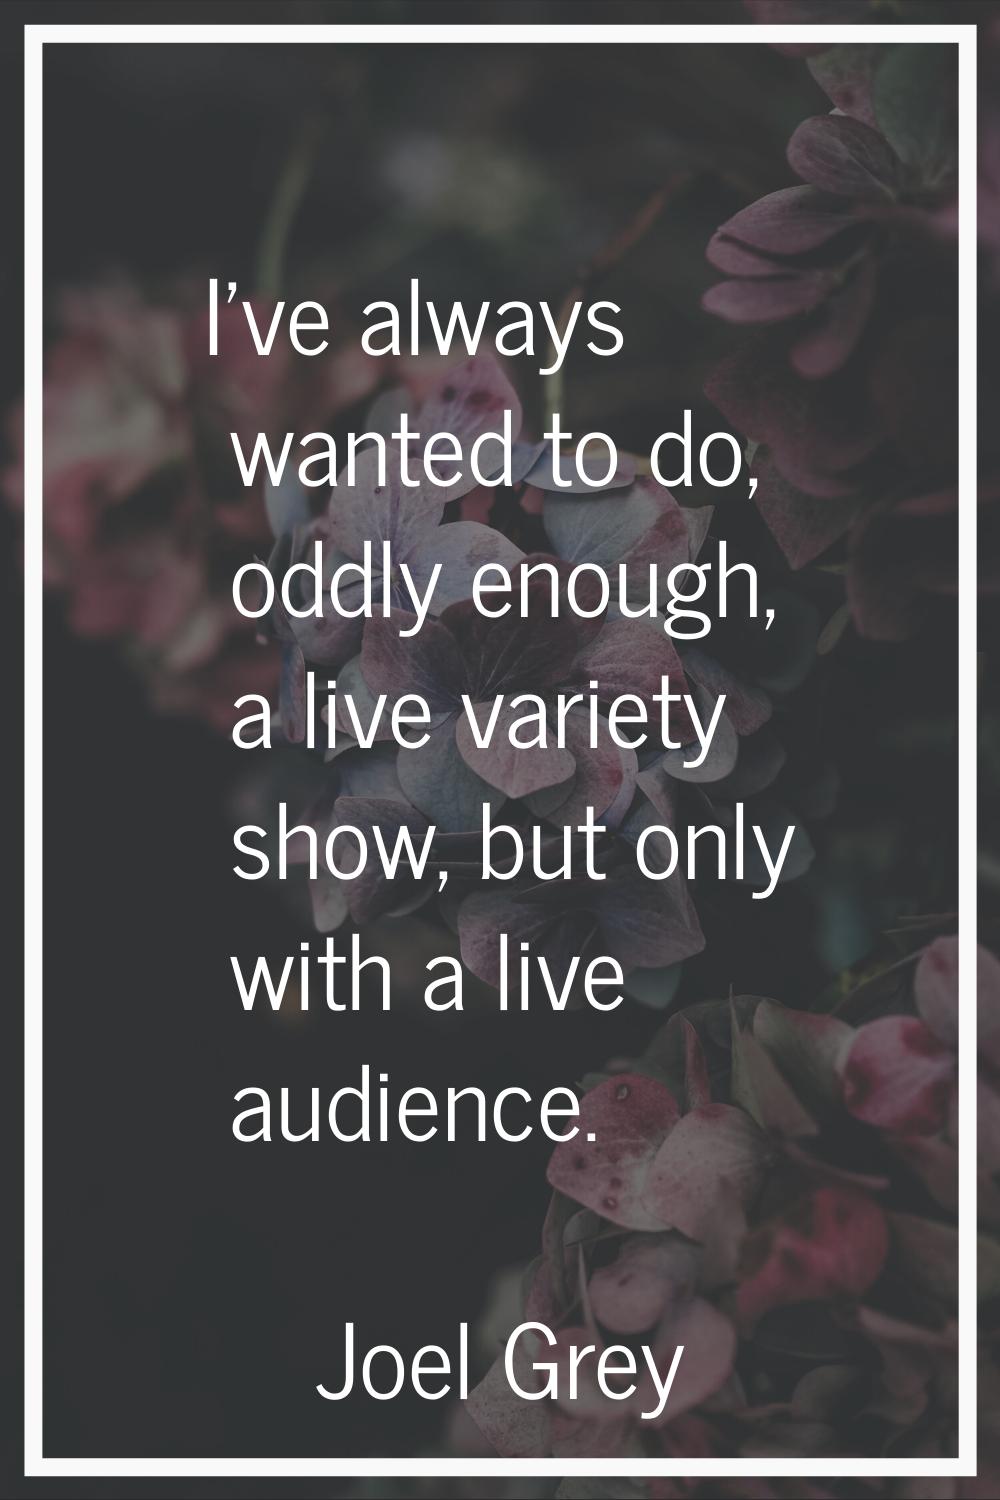 I've always wanted to do, oddly enough, a live variety show, but only with a live audience.